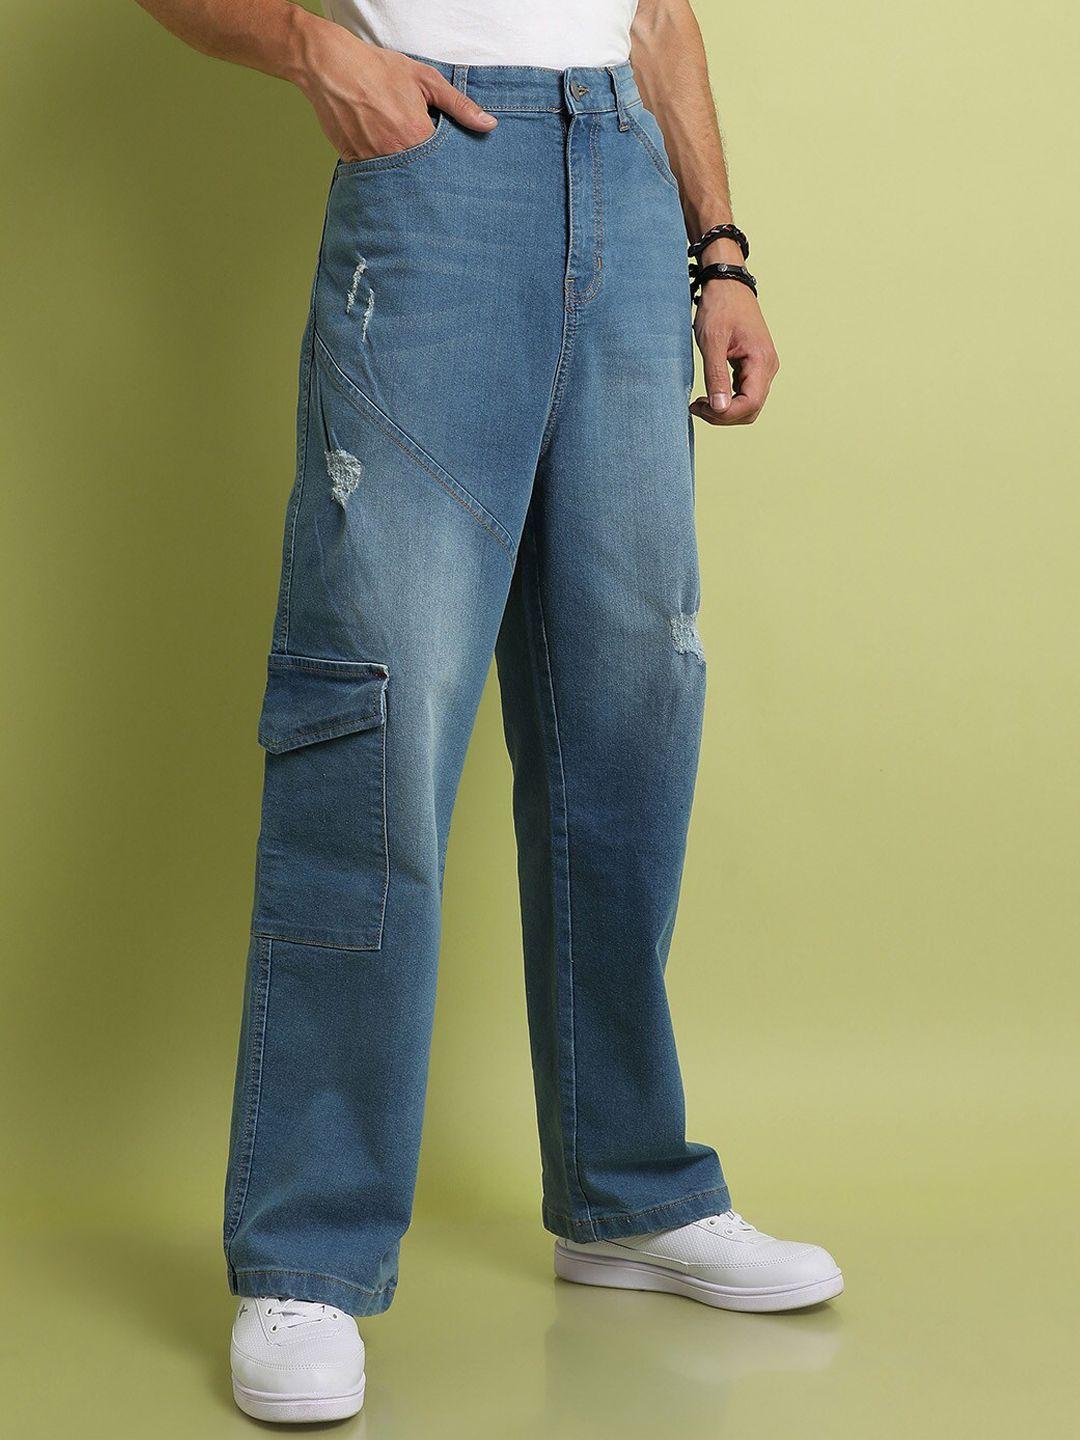 campus sutra men smart wide leg low distress light fade stretchable jeans